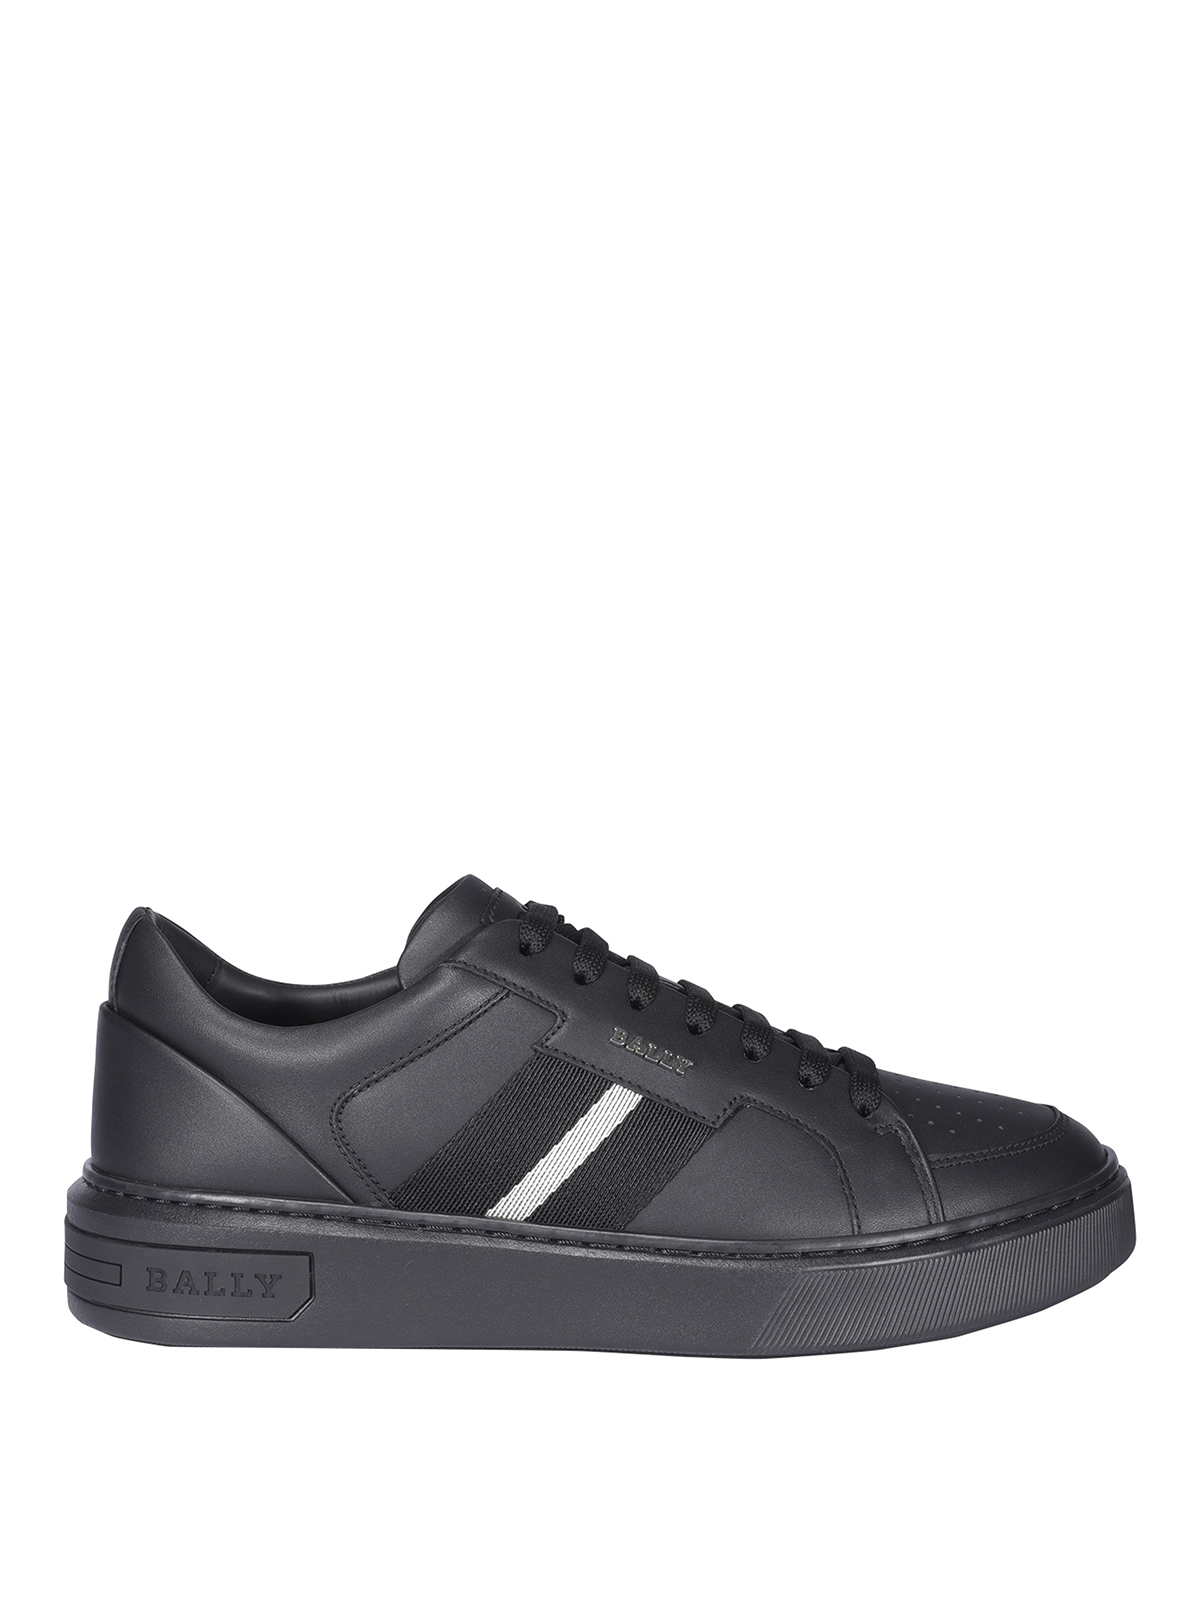 Trainers Bally - Moonyl sneakers - 6236585 | Shop online at iKRIX